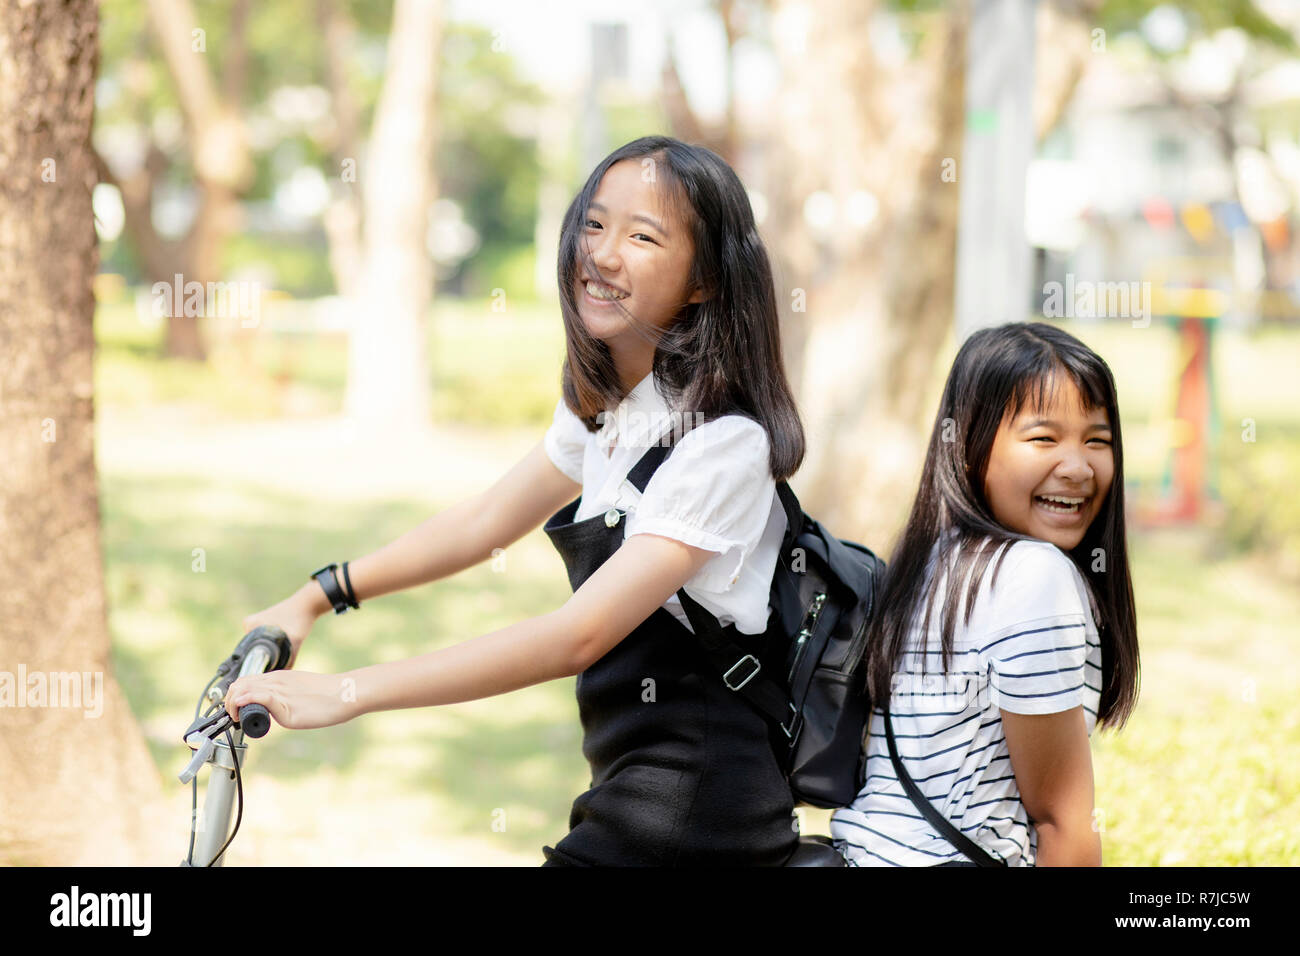 Cheerful asian teenager bonheur émotion riding bicycle in parc public Banque D'Images